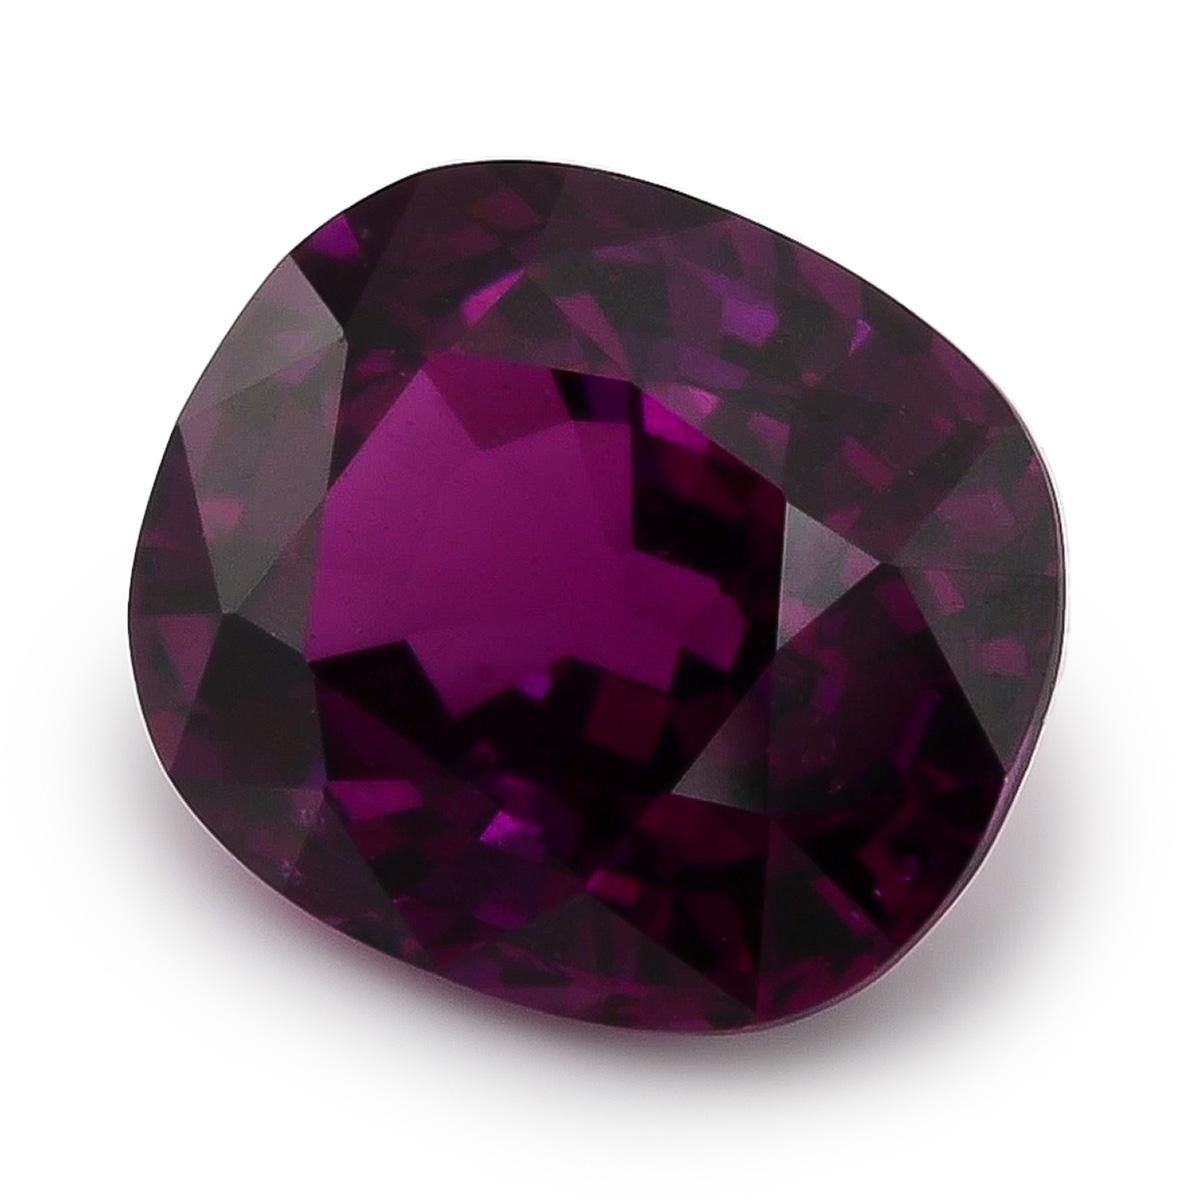 Dive into the enchanting world of gemstones with 5.06 carats Natural Purple Garnet from Mozambique. This stunning gem boasts a unique garnet shape and measures 10.74 x 9.04 x 6.03 mm, revealing its exceptional quality. With very clean clarity, top